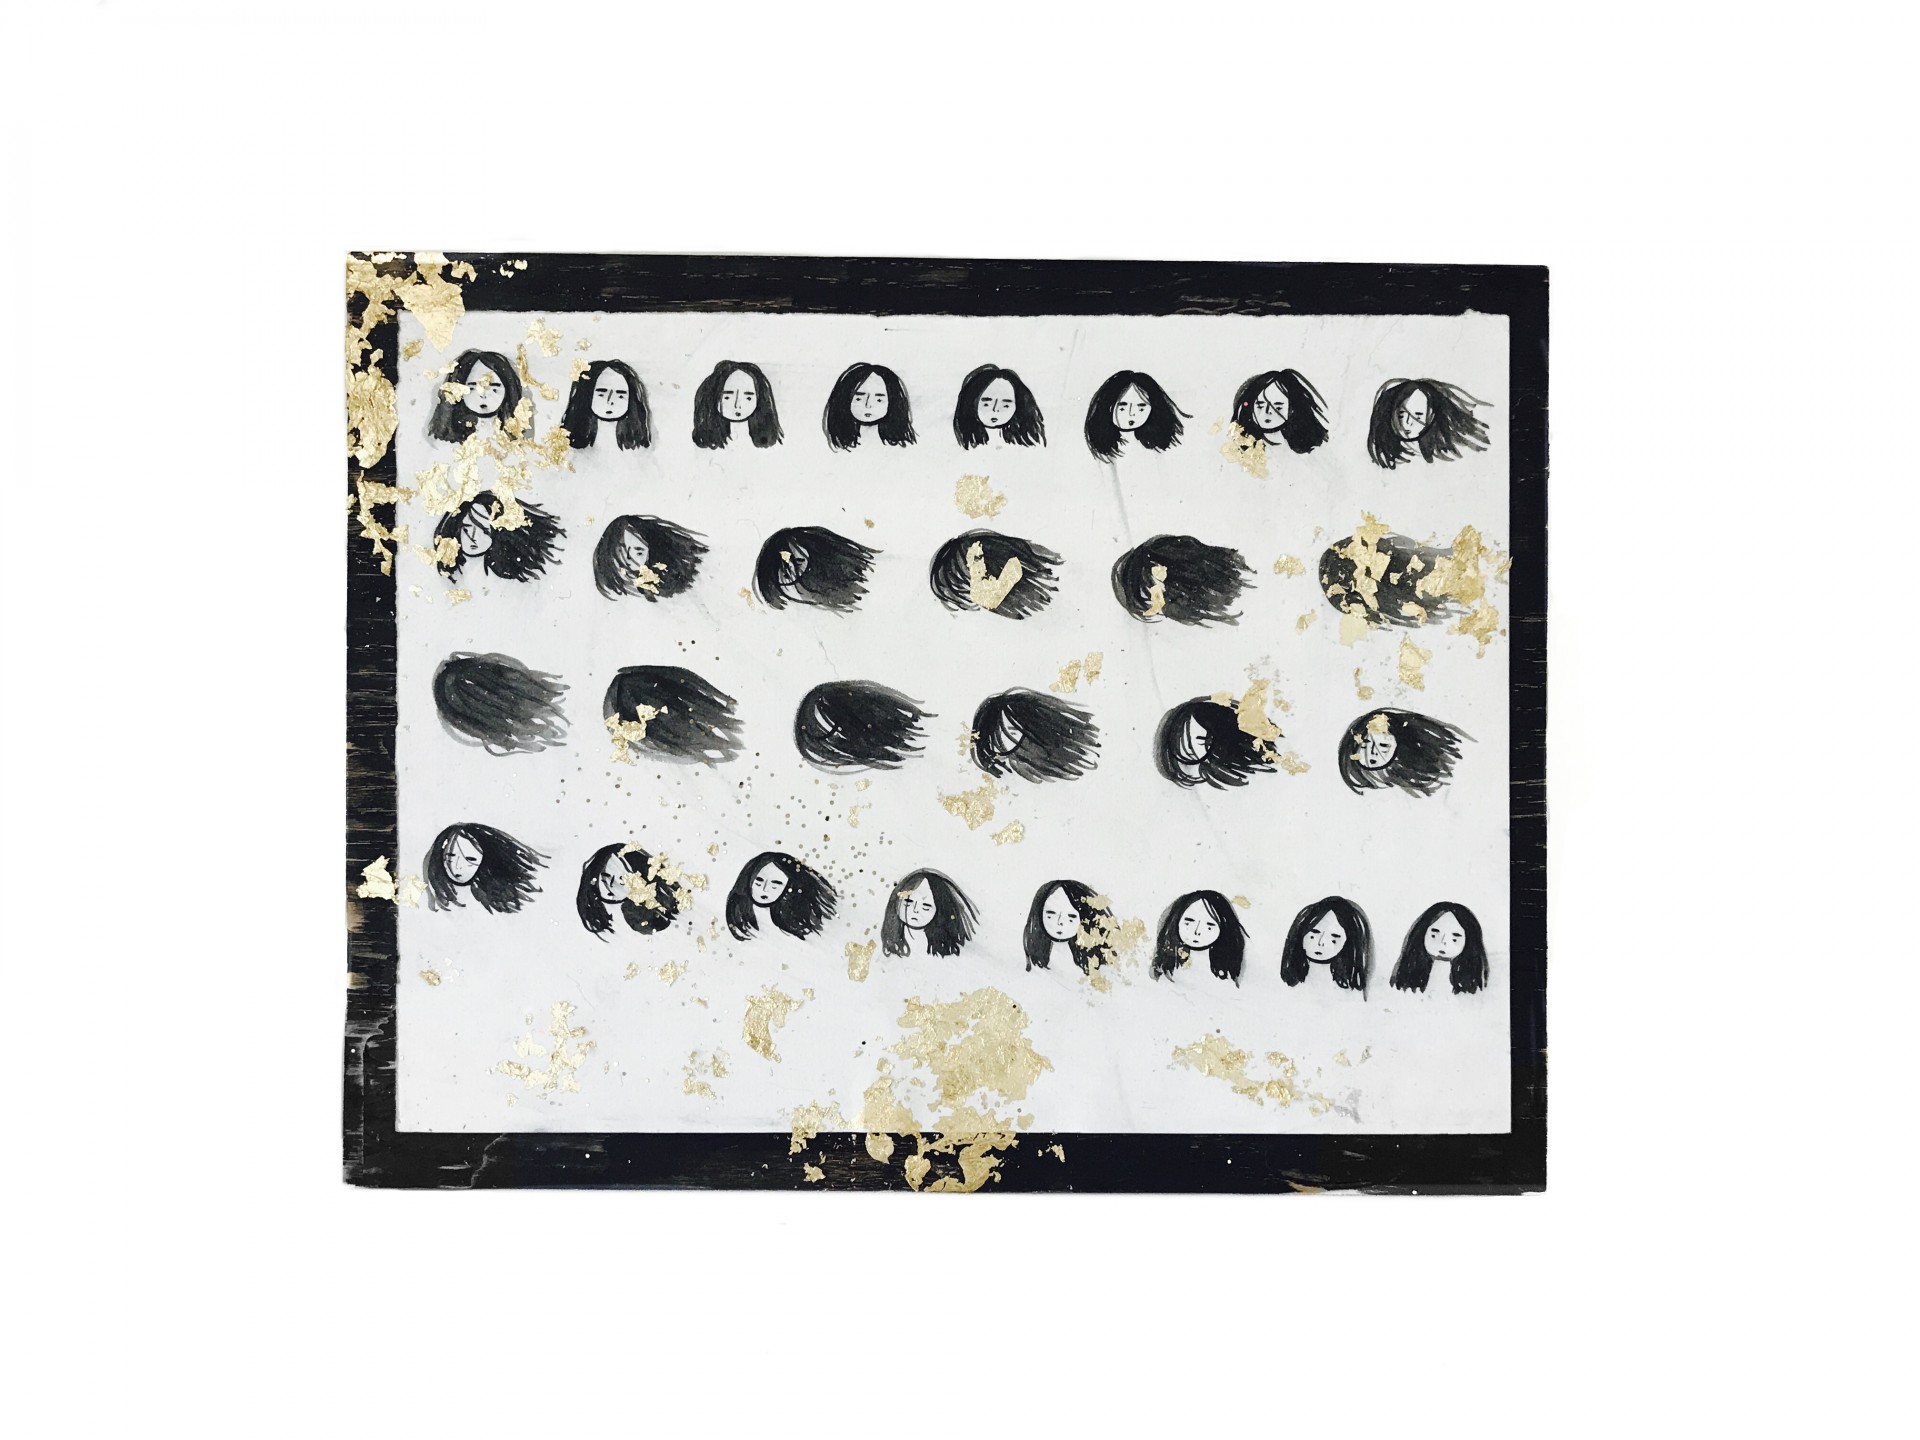 Rectangular painting with black border. Narrative of a girl's hair blowing in wind illustrated through a grid of faces. Pieces of gold foil collaged on top. 